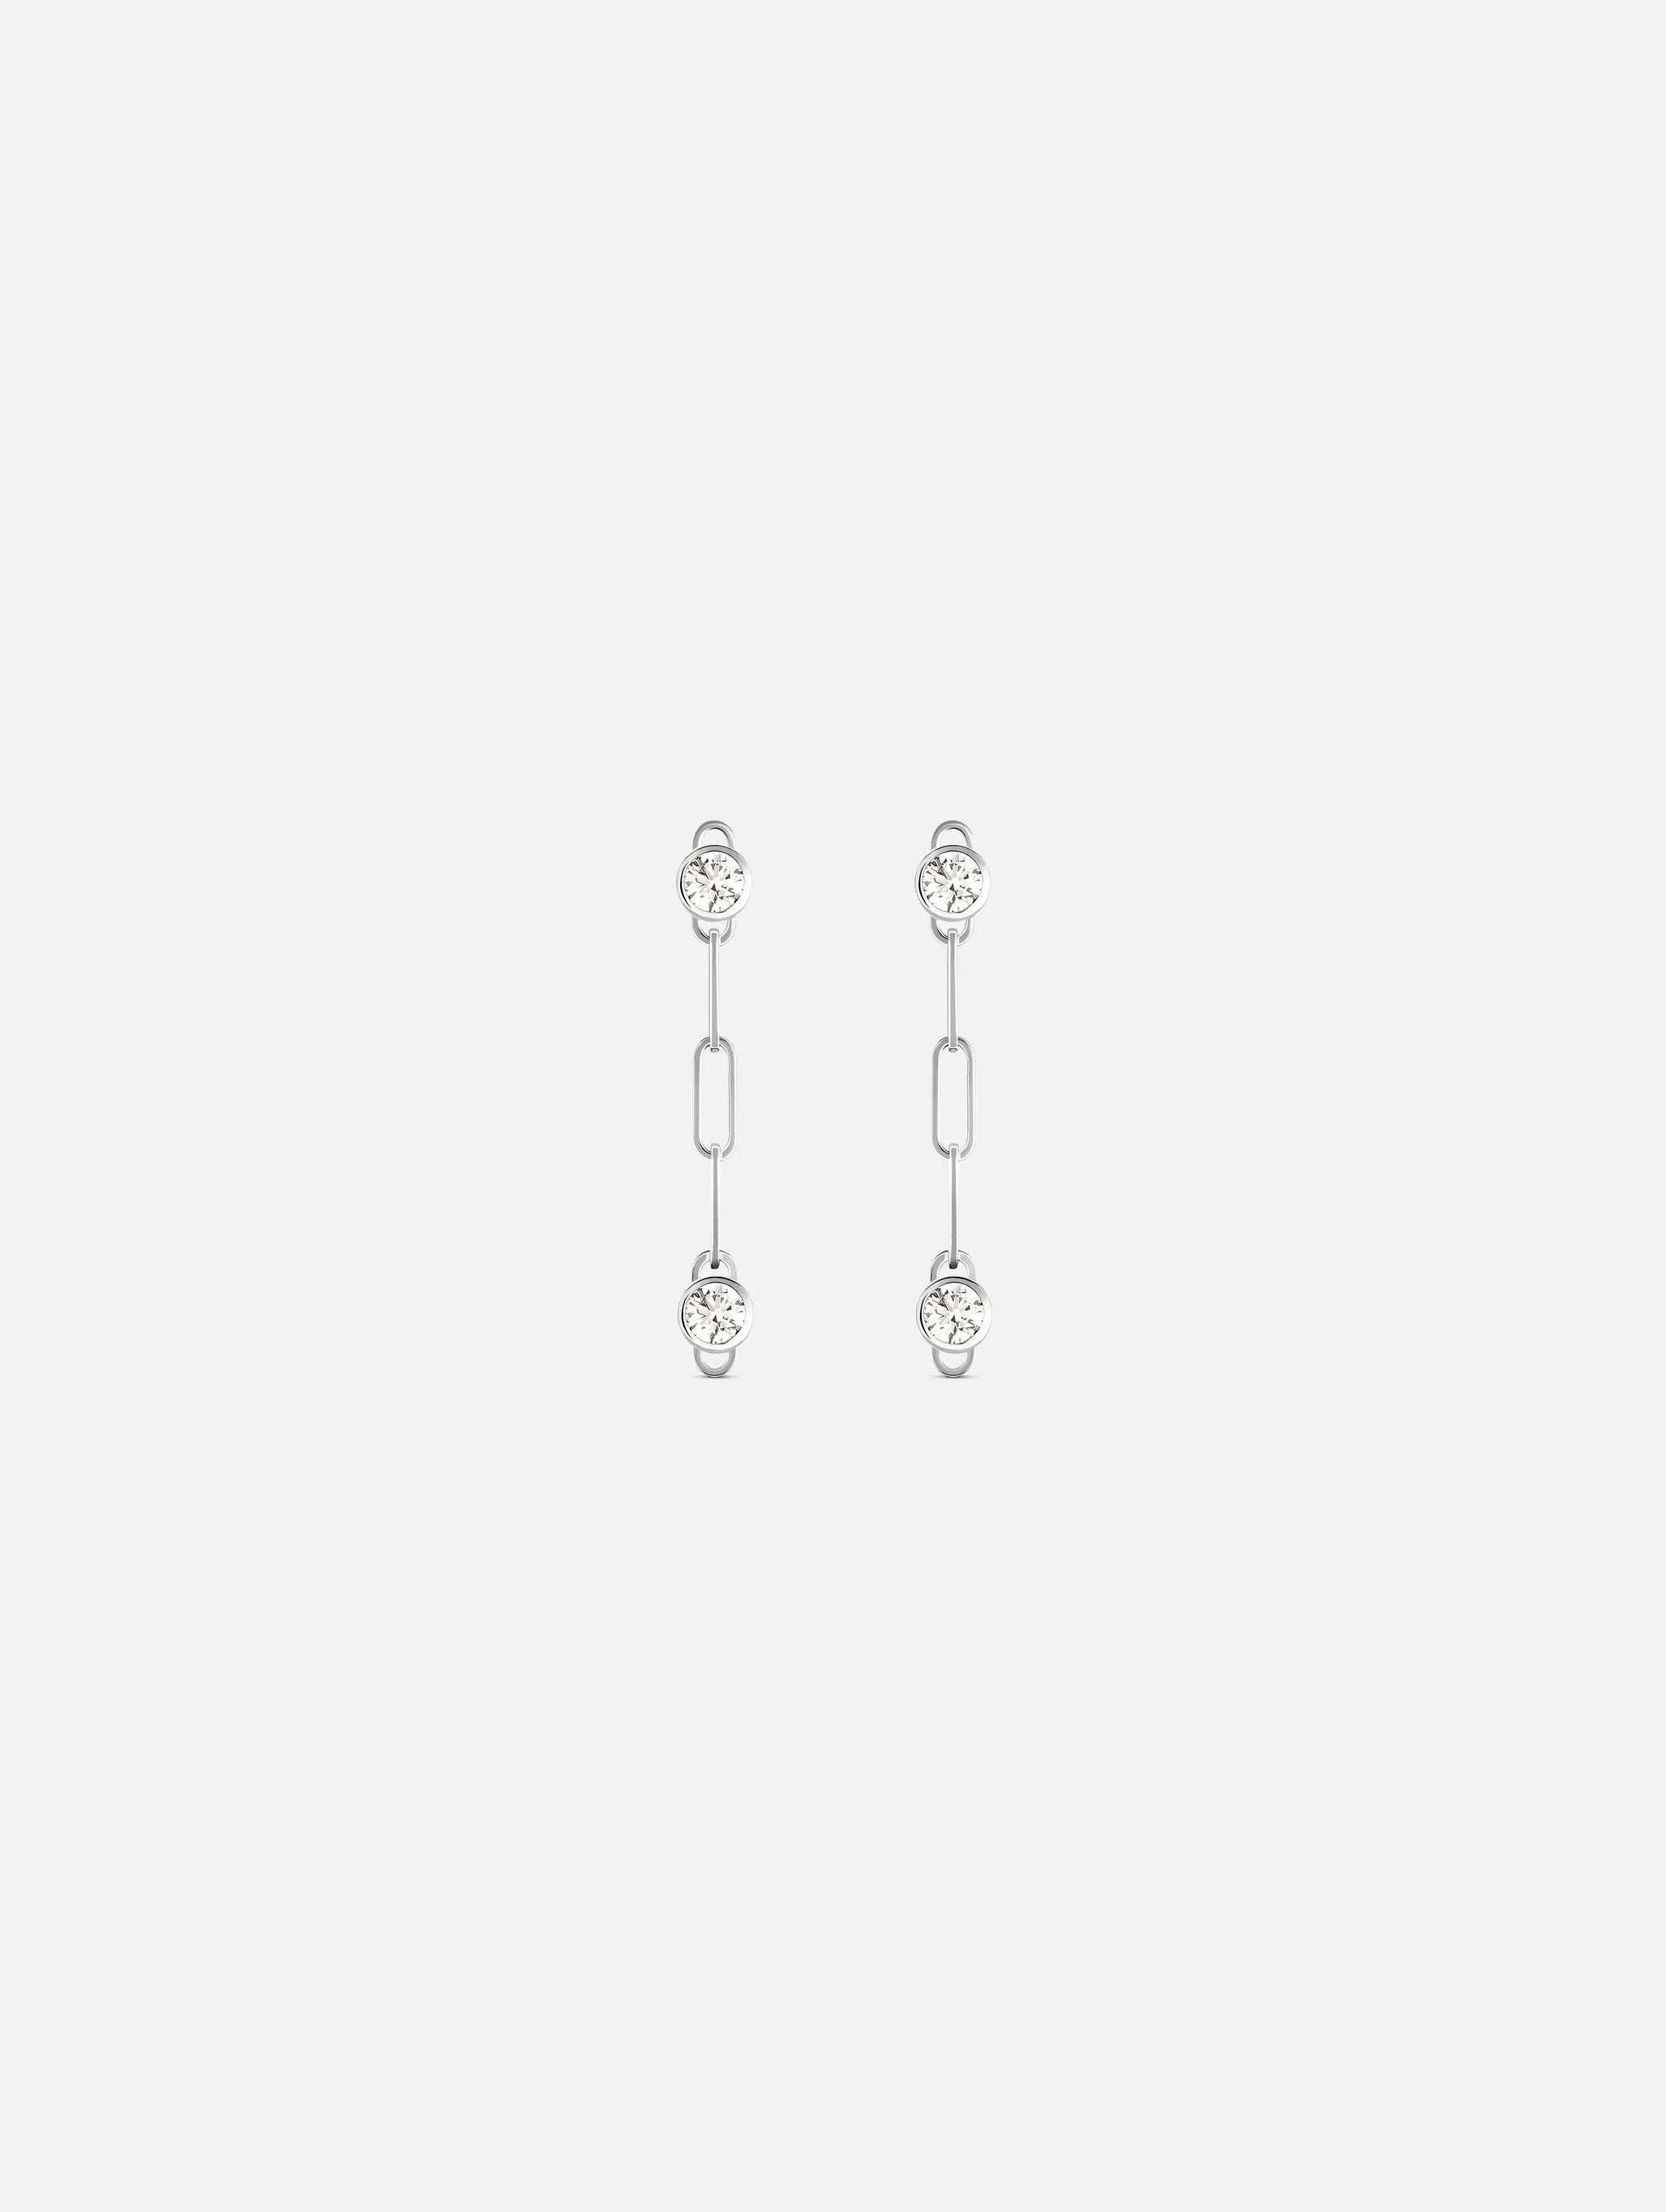 Round Duo PM Classics Earrings in White Gold - 1 - Nouvel Heritage